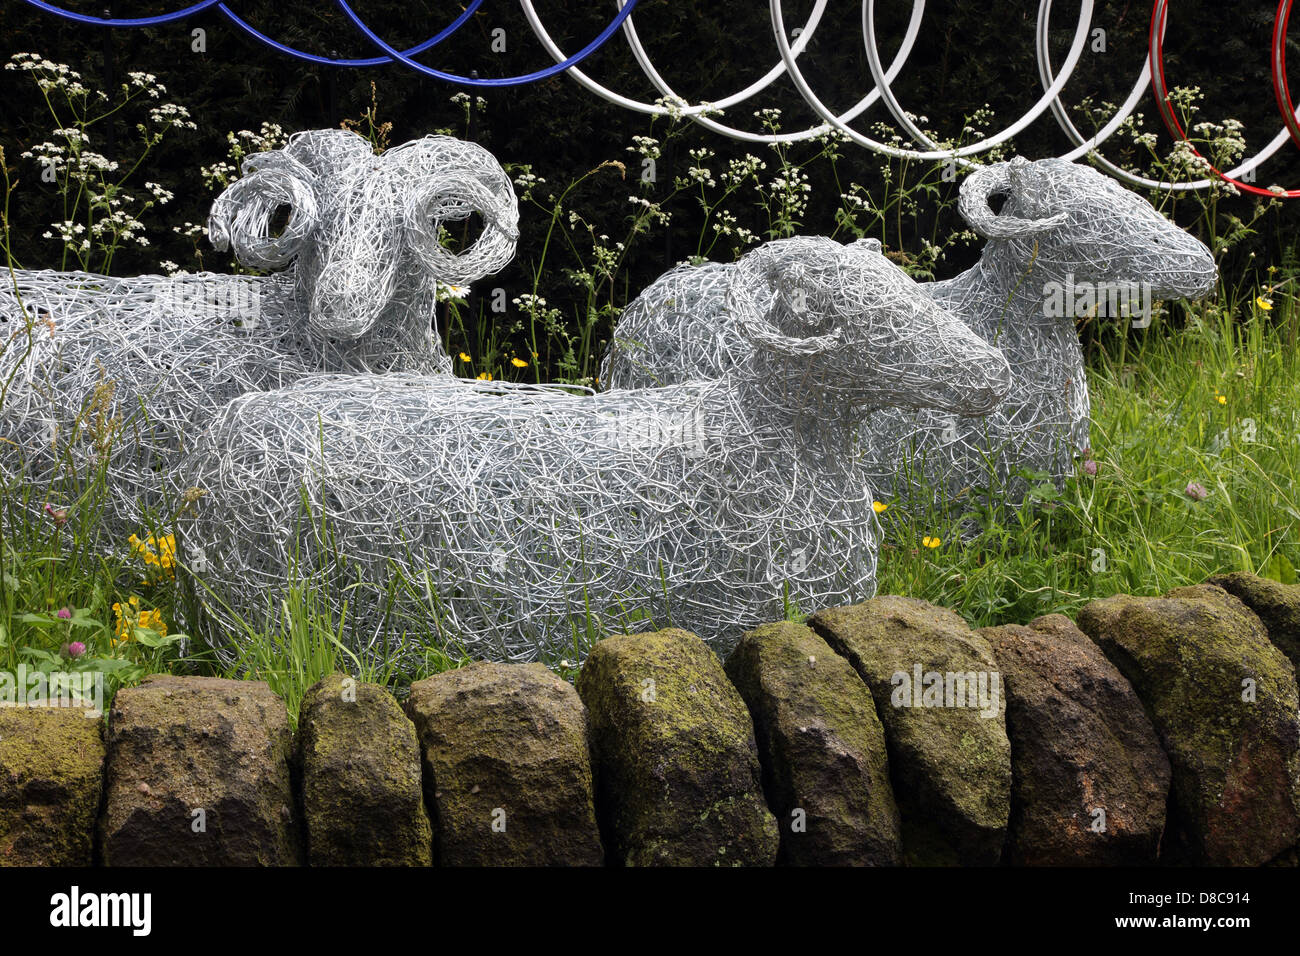 Wire sculpture sheep in Le Jardin Yorkshire, Artisan Garden at RHS Chelsea Flower Show 2013 Stock Photo